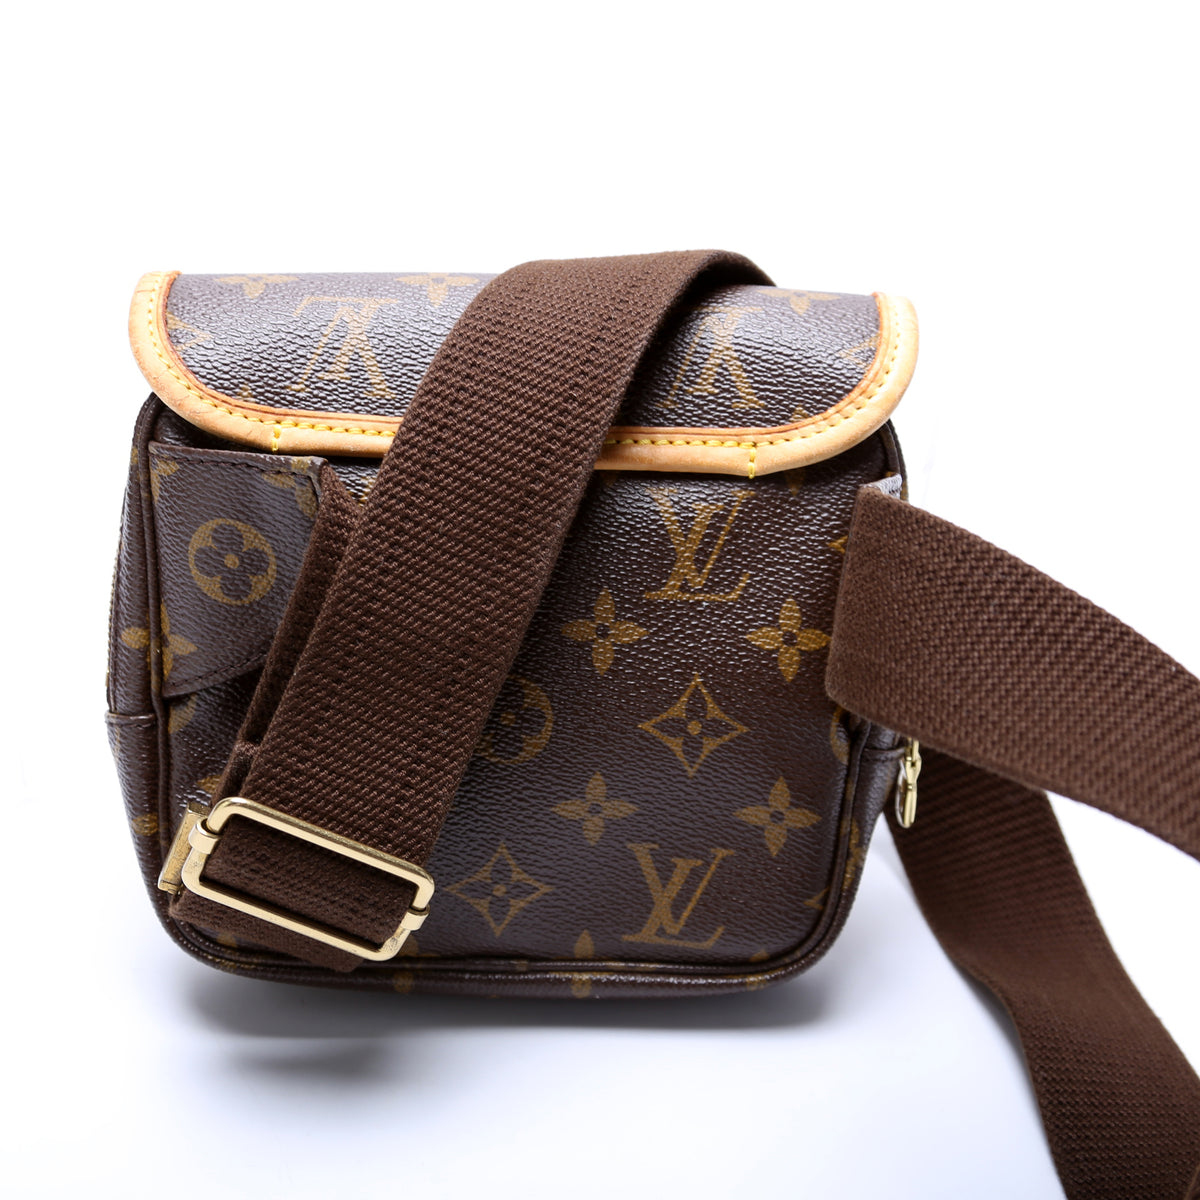 Shop for Louis Vuitton Monogram Canvas Leather Bosphore Messenger PM  Handbag - Shipped from USA